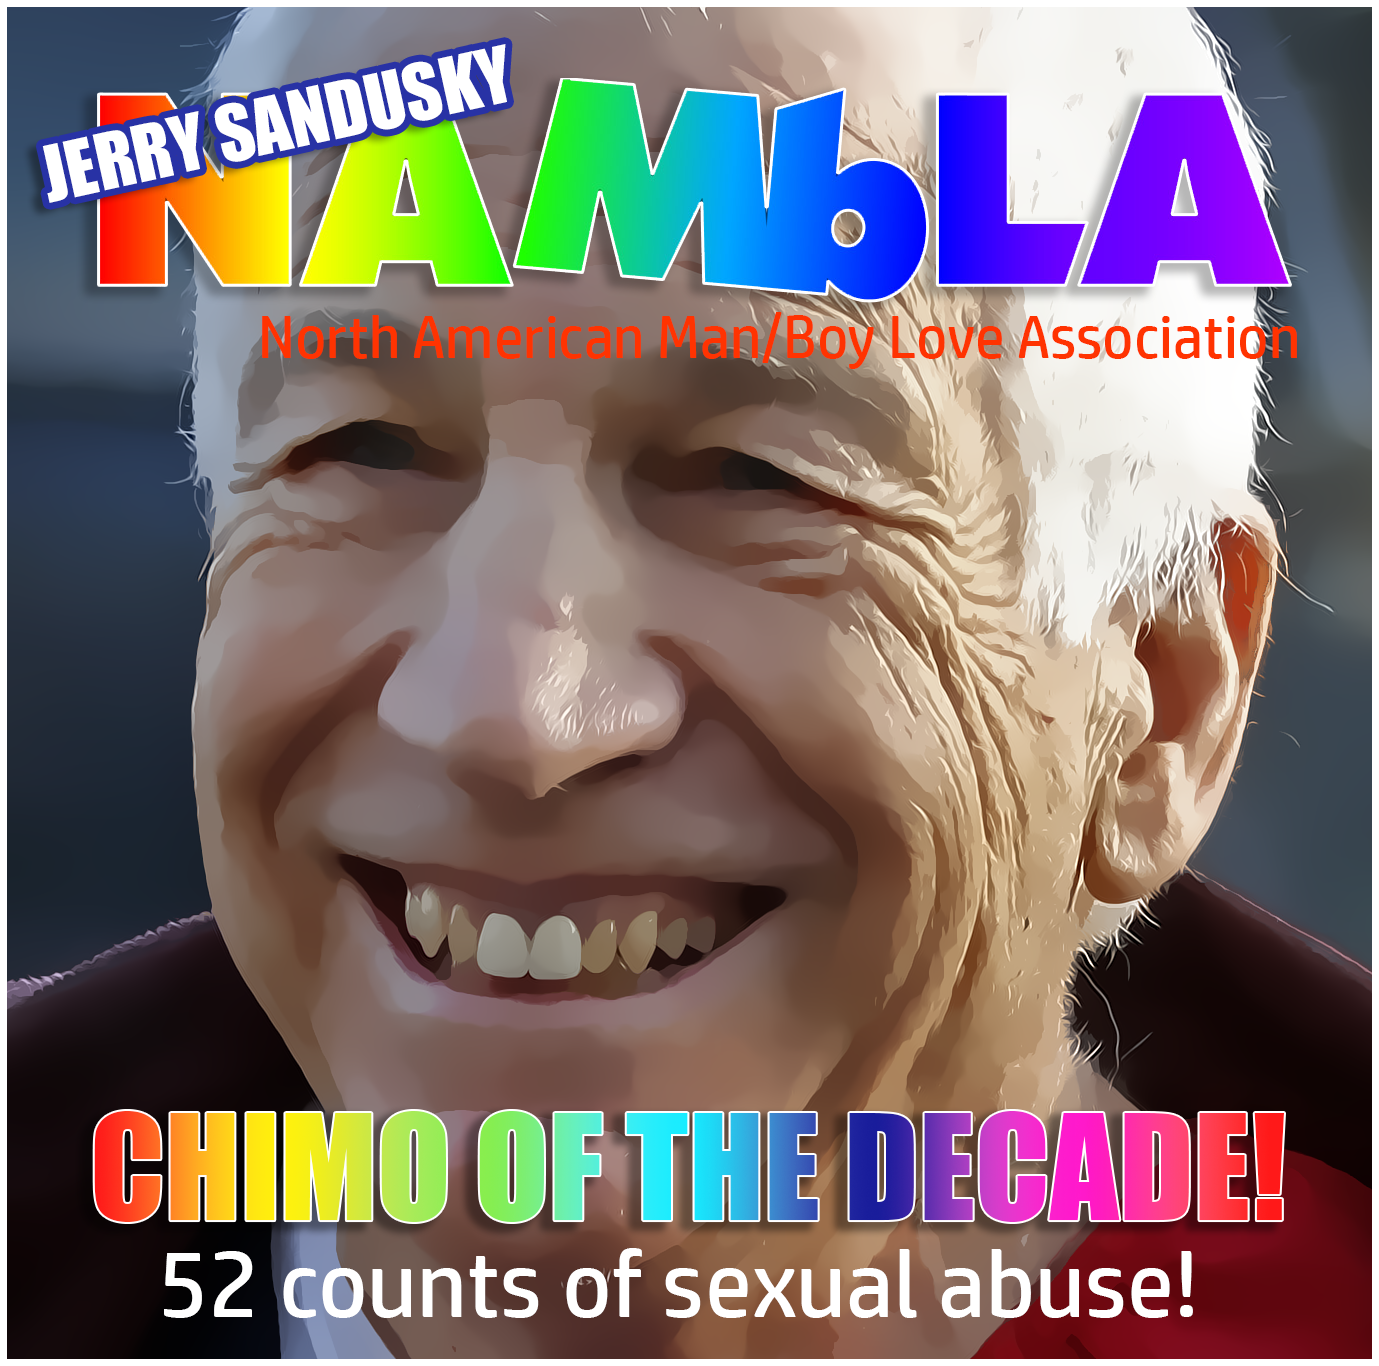 smile - Jerry Sandusky Berby Santa Mola No Anterian ManBoy Love Associatio Chimo Of The Decade! 52 counts of sexual abuse!